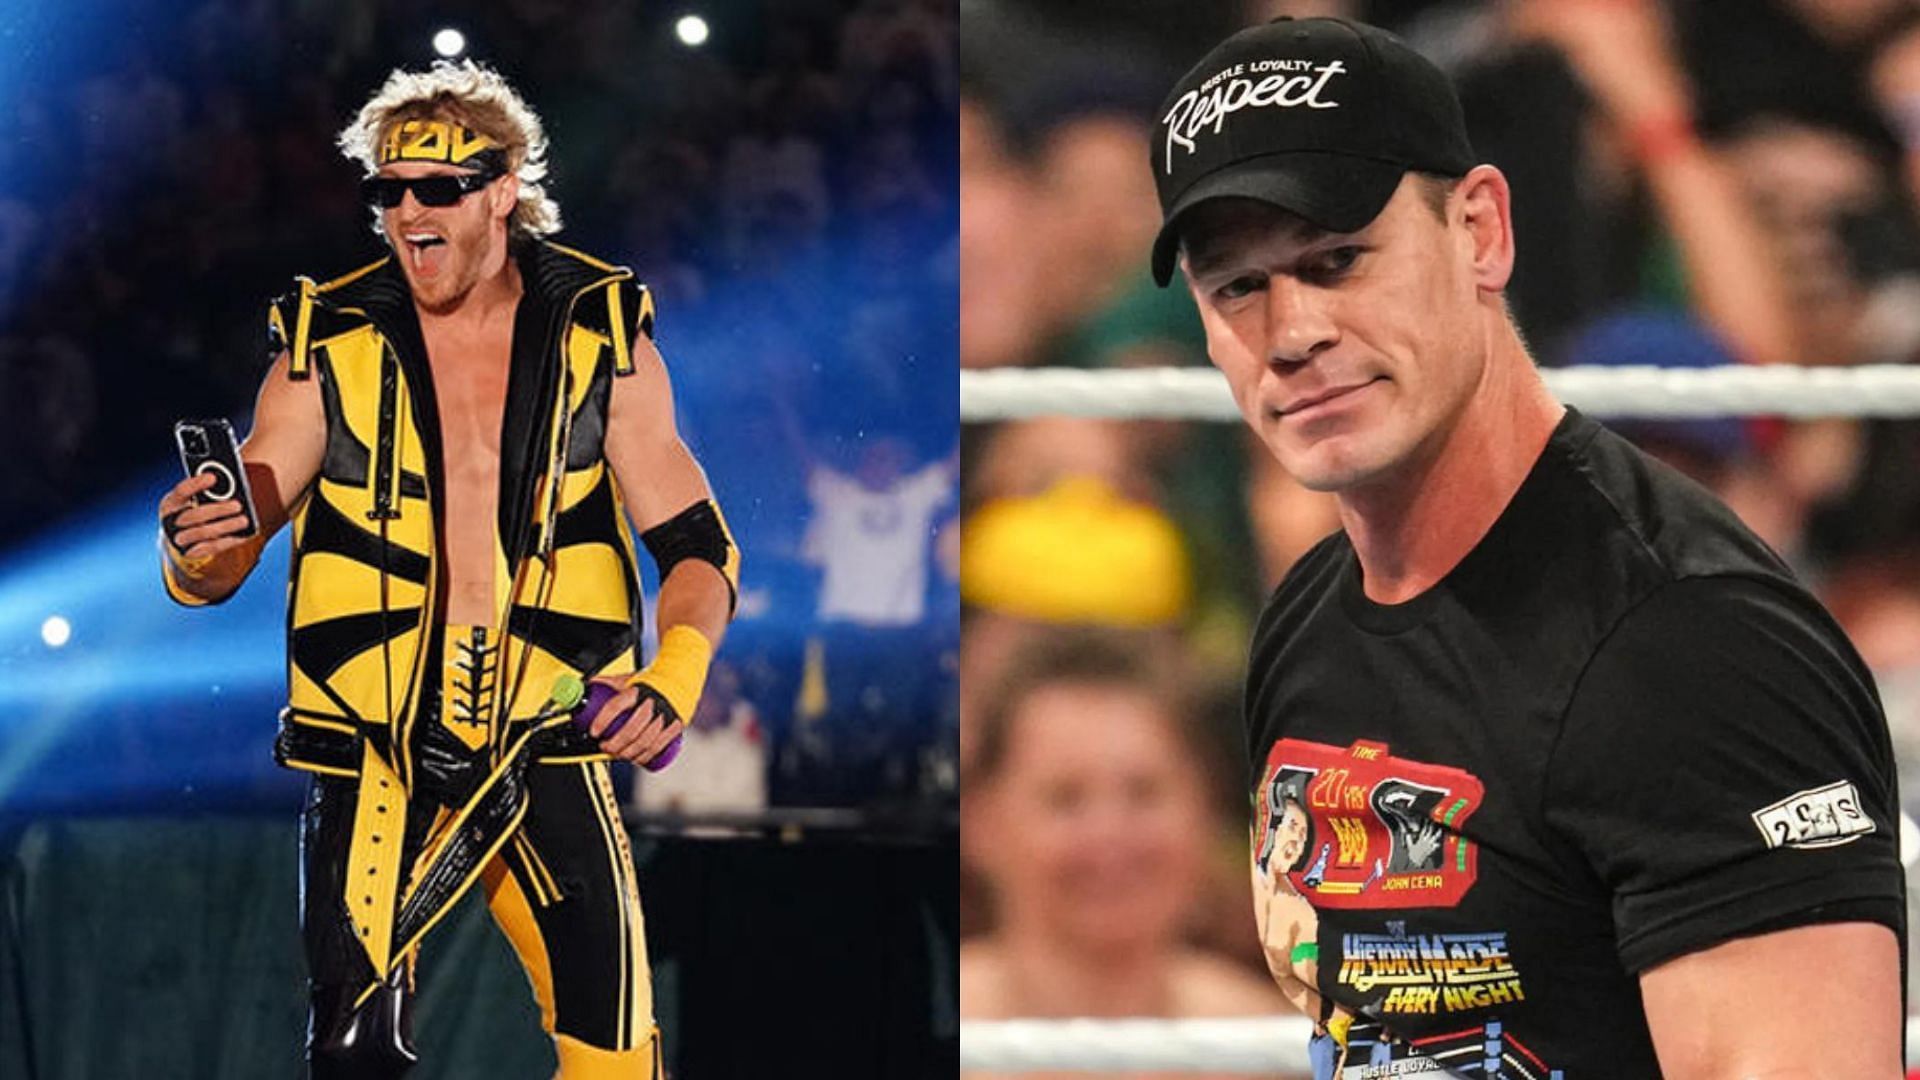 Could we witness these two men square-off in a WWE ring?